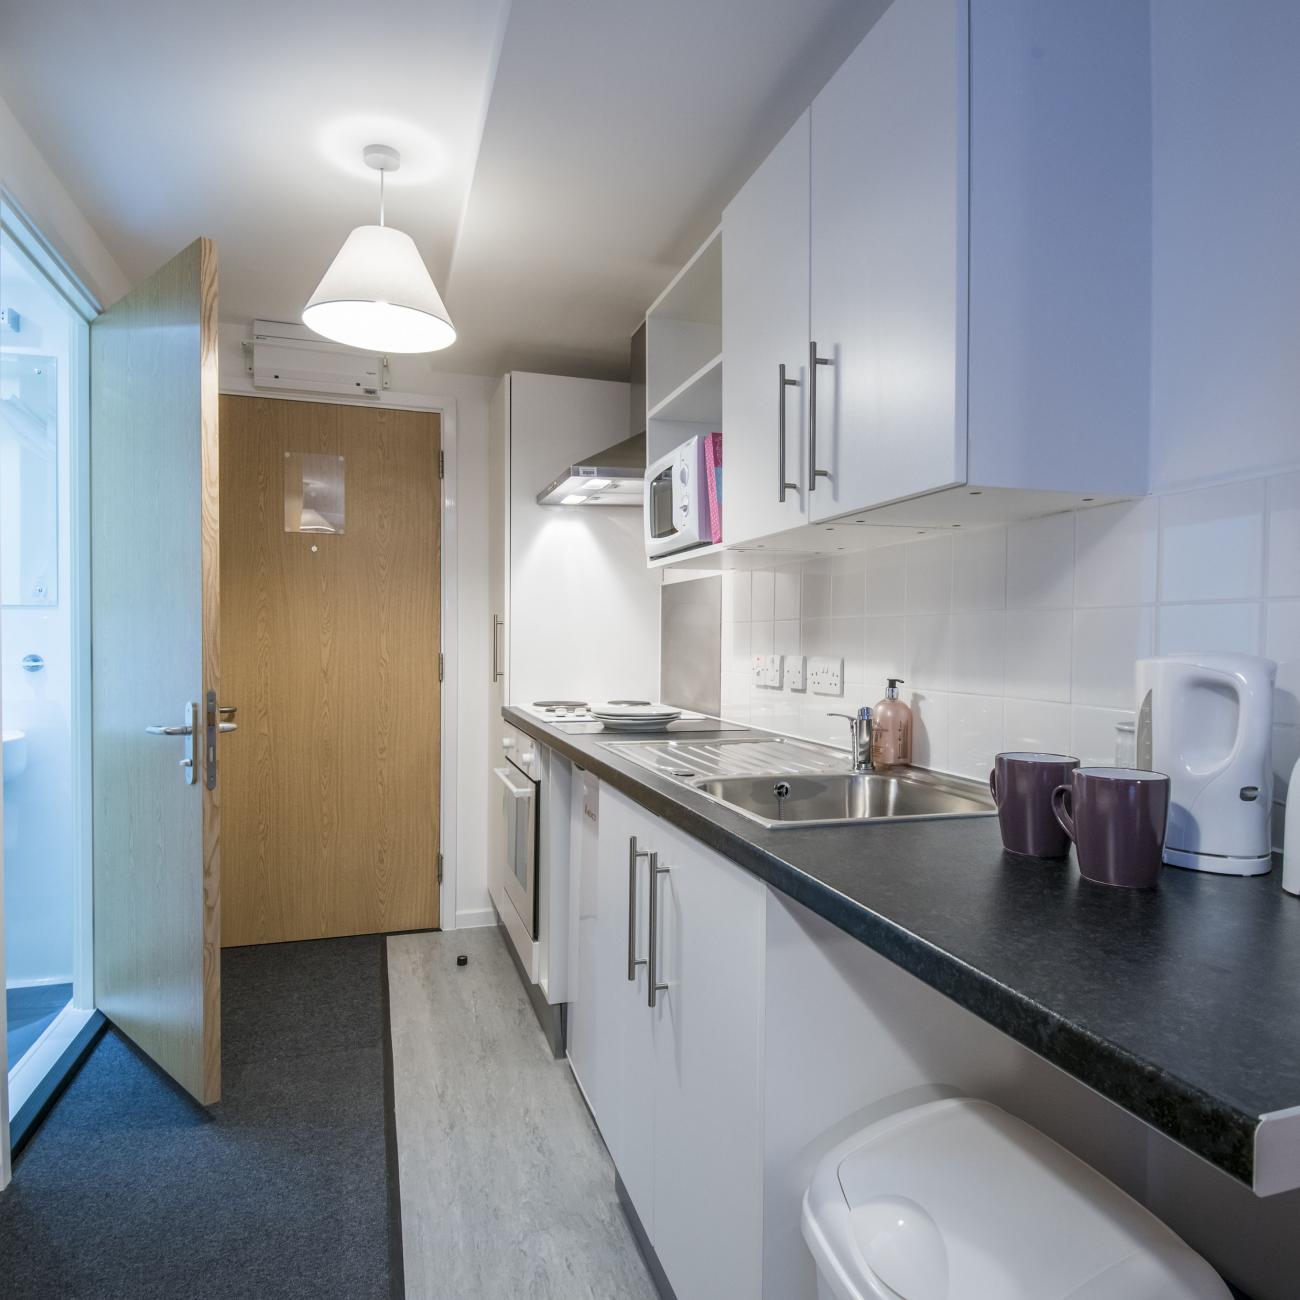 A modern studio flat showing kitchenette and entrance to bathroom.